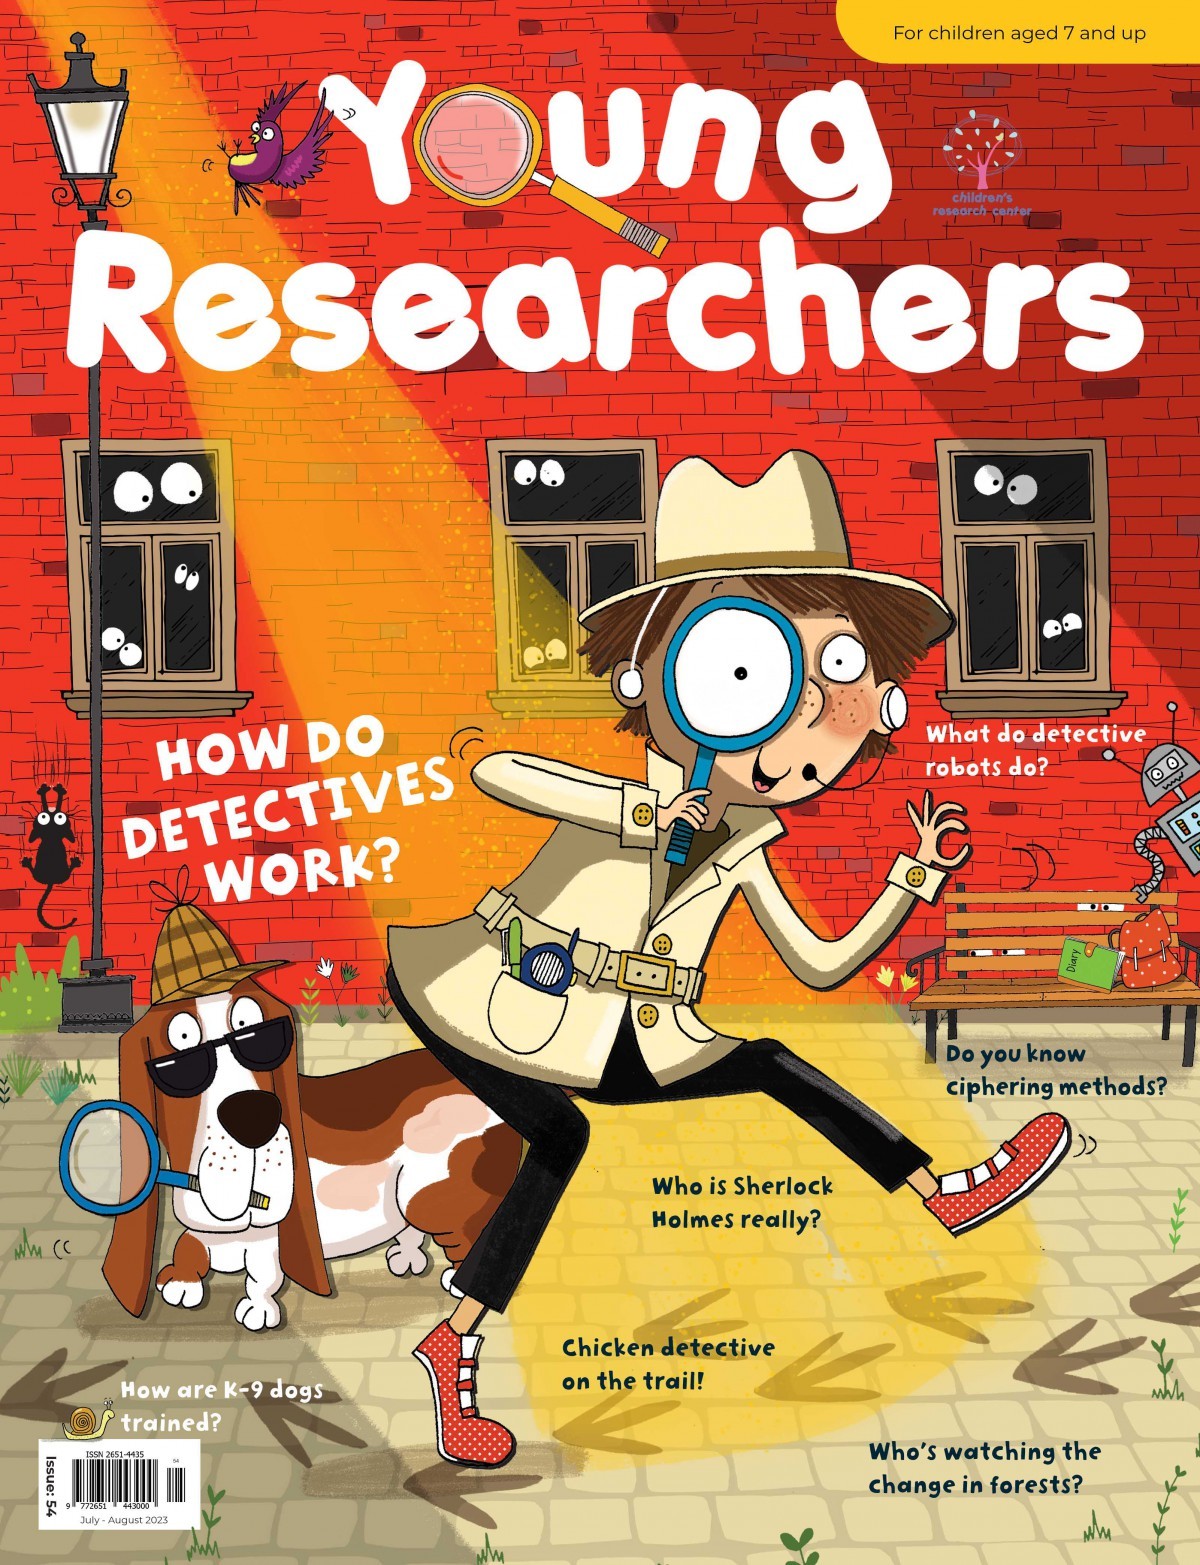 Young Researchers Issue 54: How Do Detectives Work?